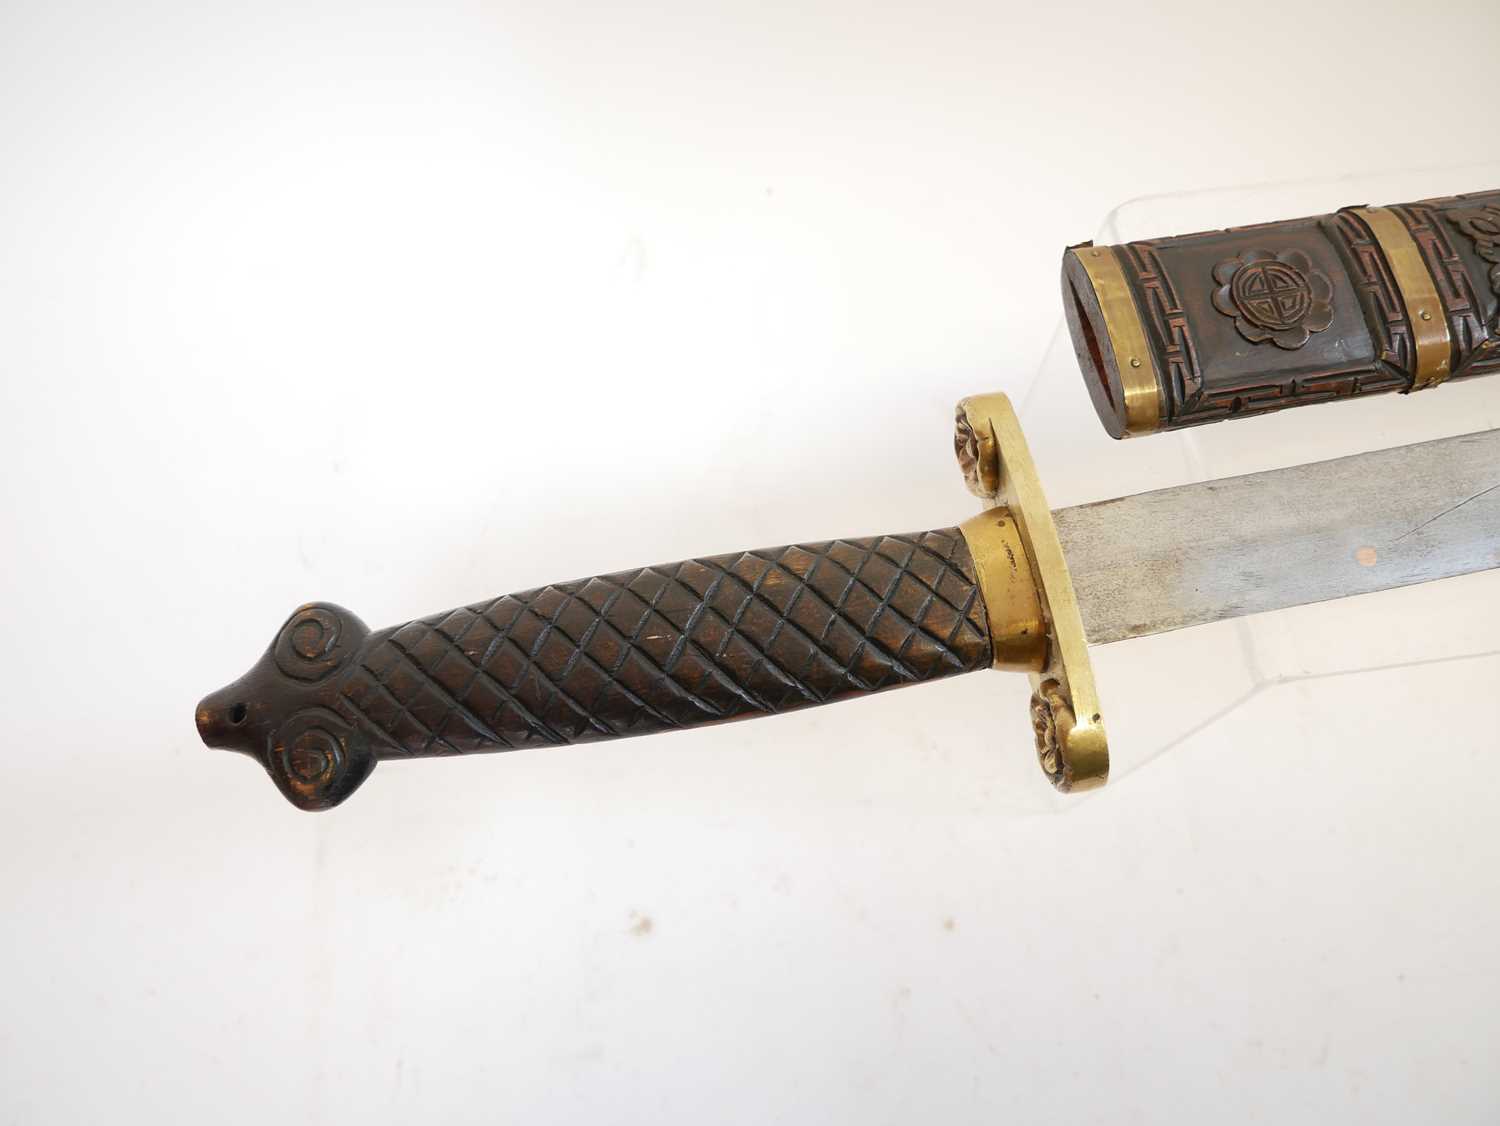 Chinese double edged sword, with copper studded blade, brass guard and carved grip and scabbard. - Image 3 of 7